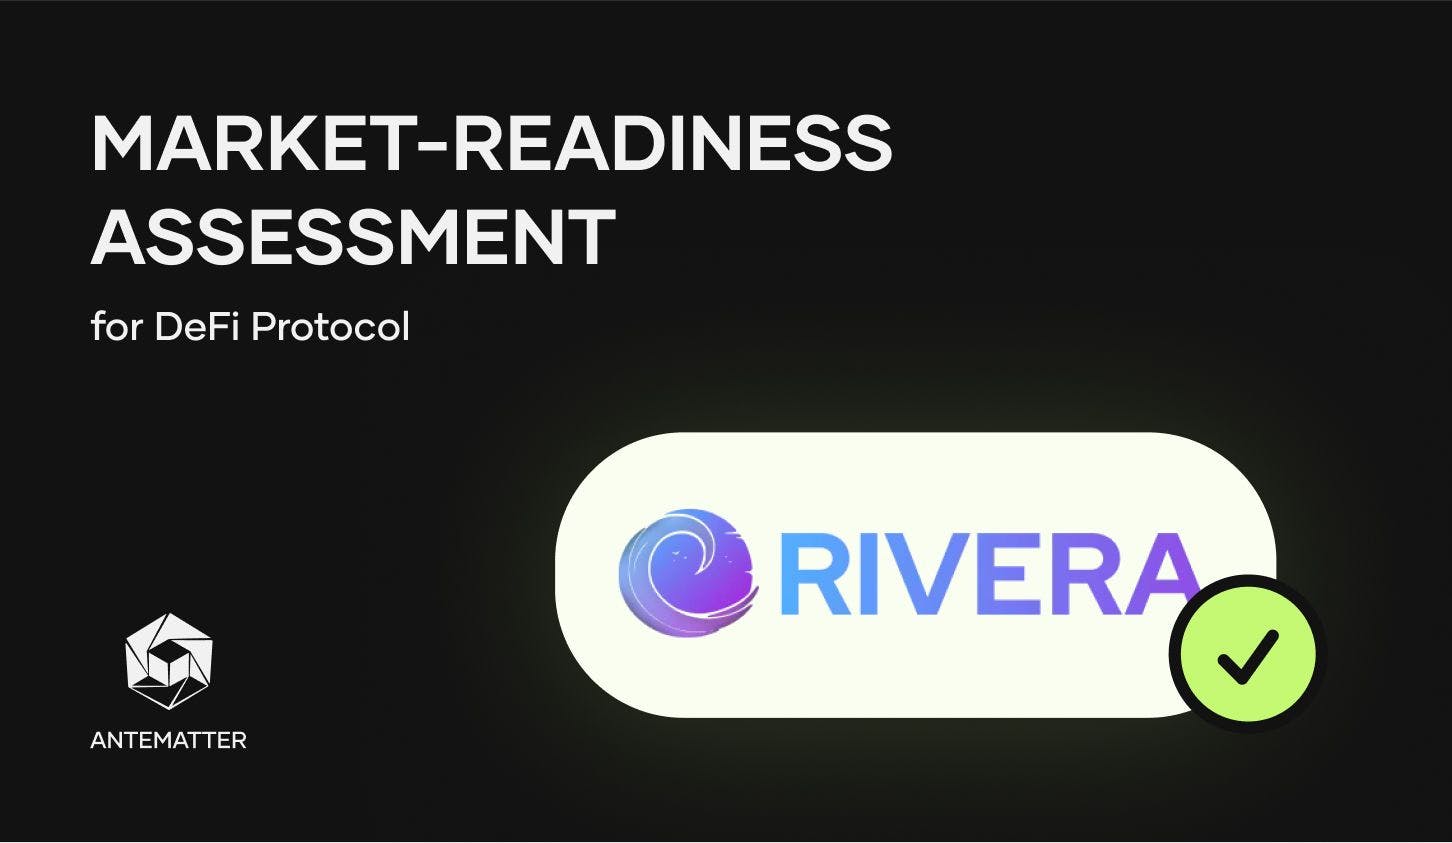 Market-Readiness Assessment for DeFi Protocol